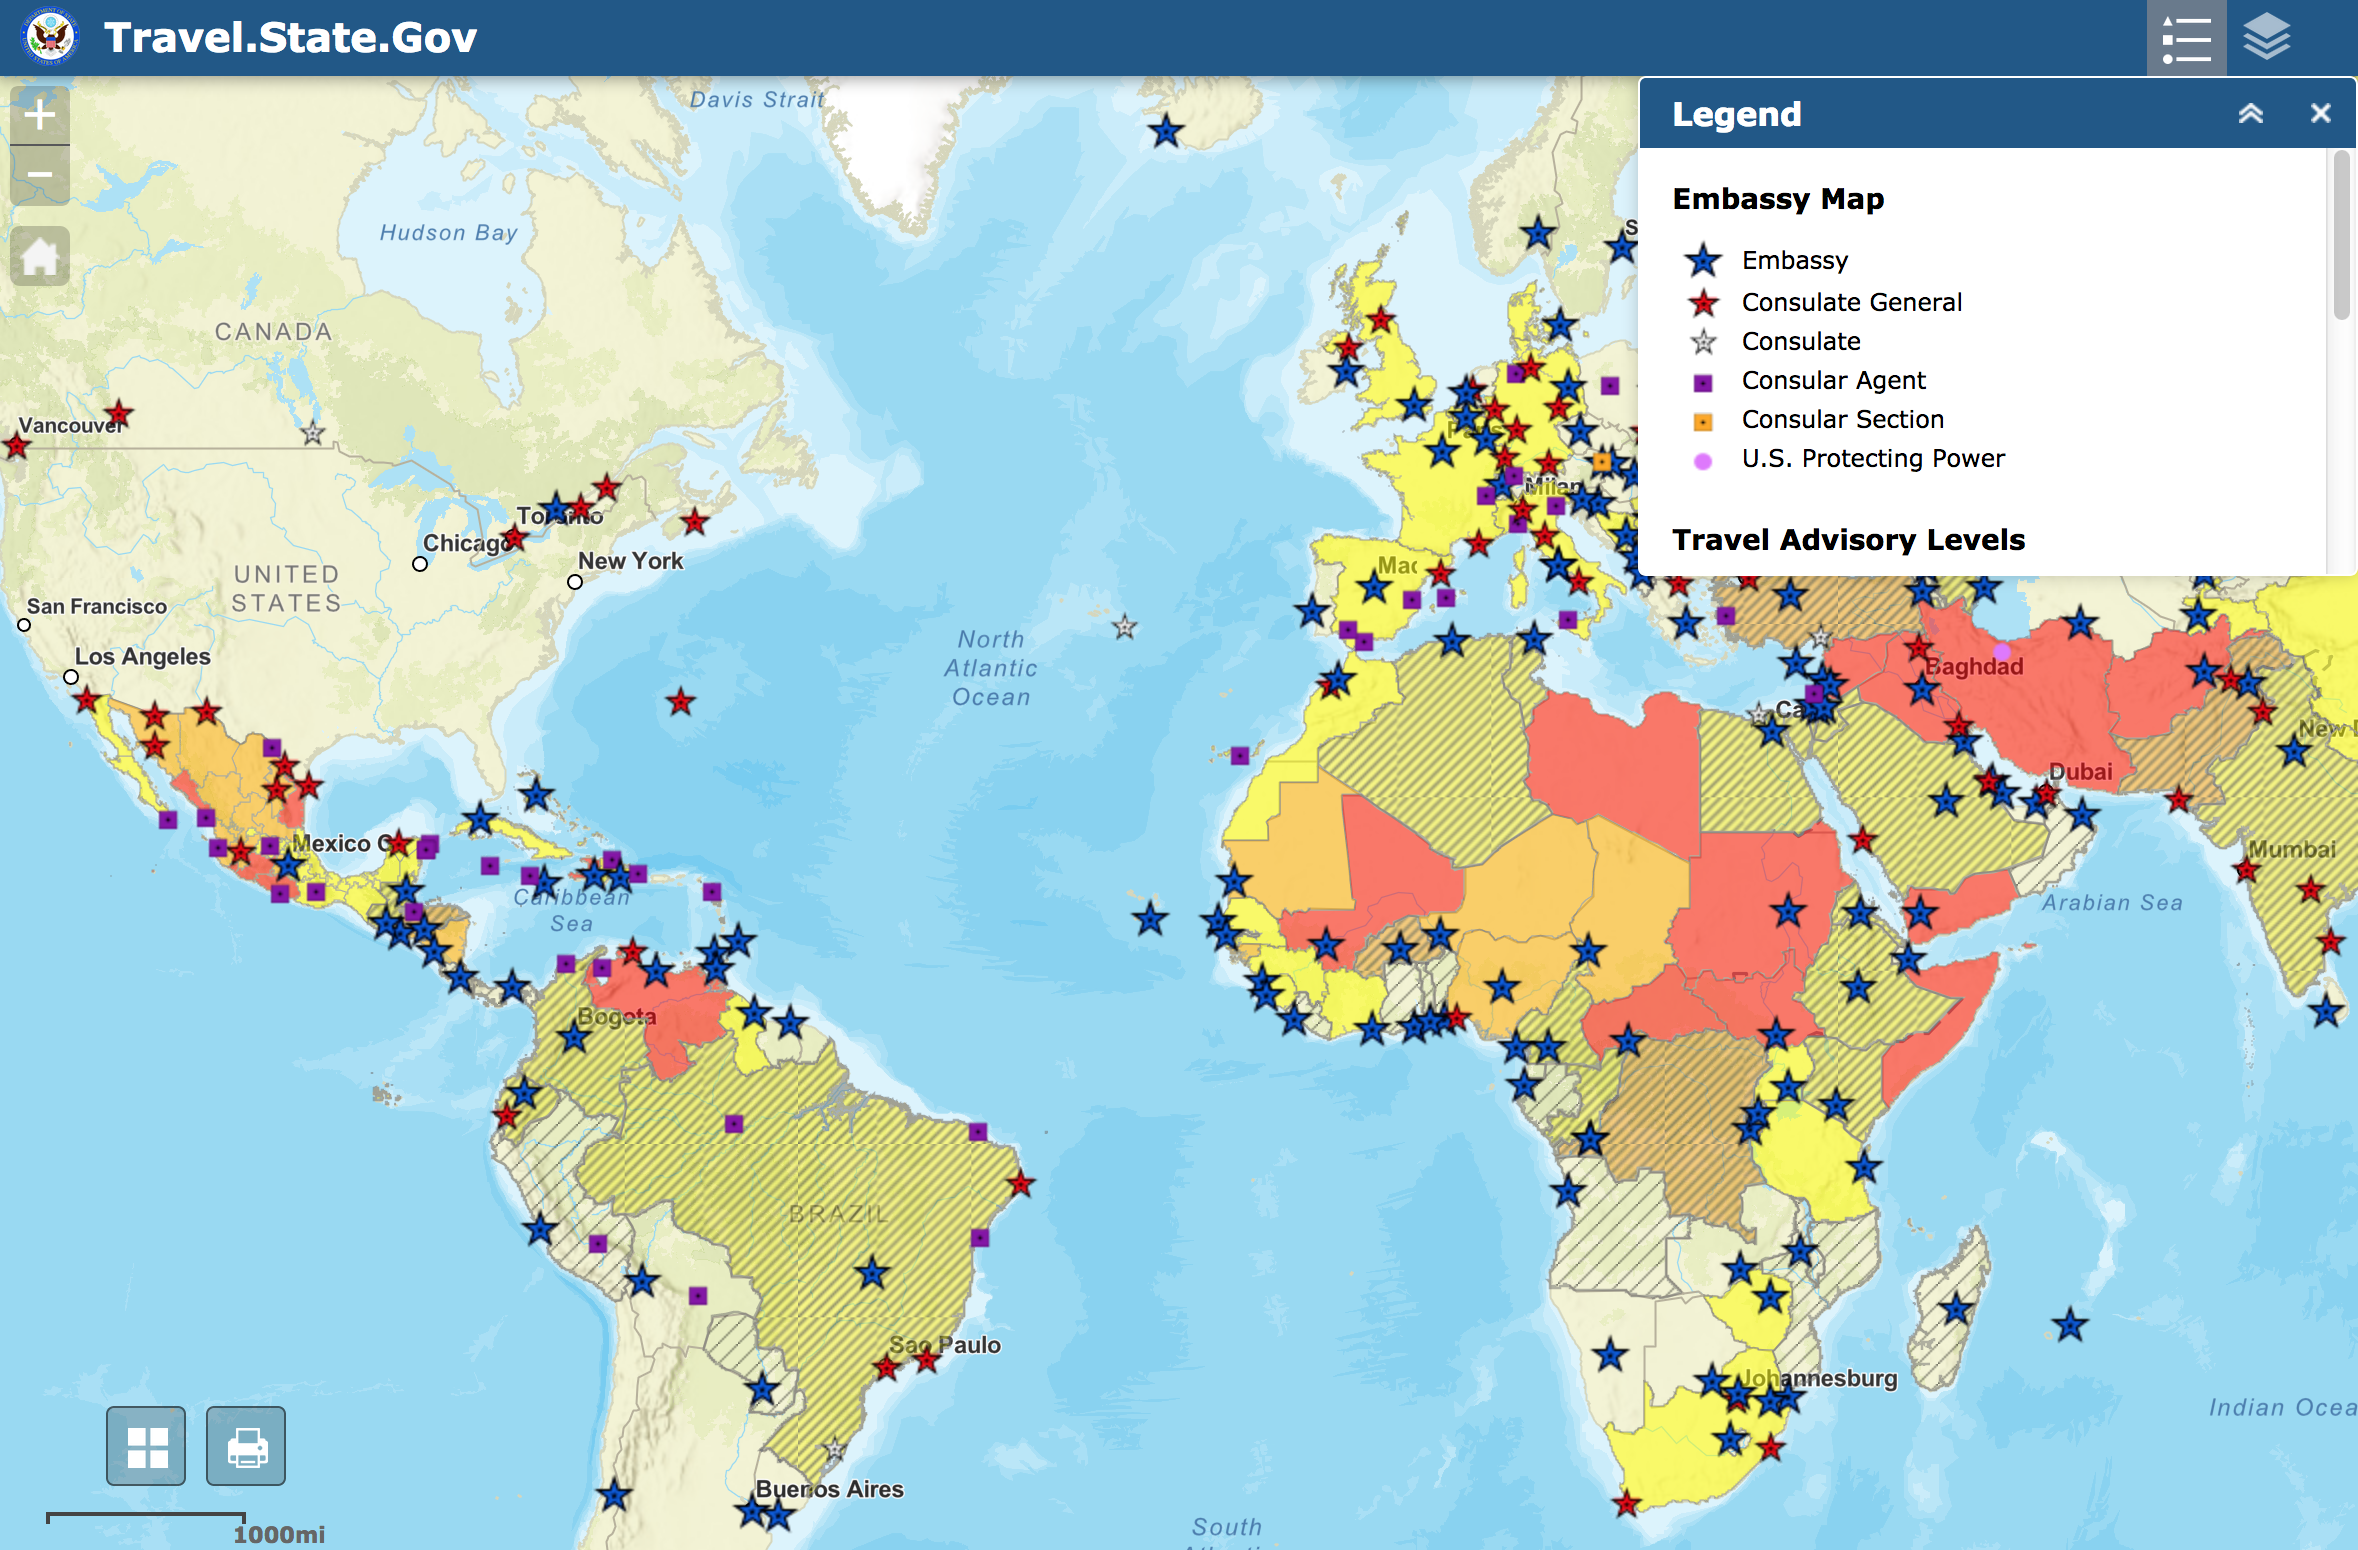 Interactive Travel Advisory World Map With Embassies And